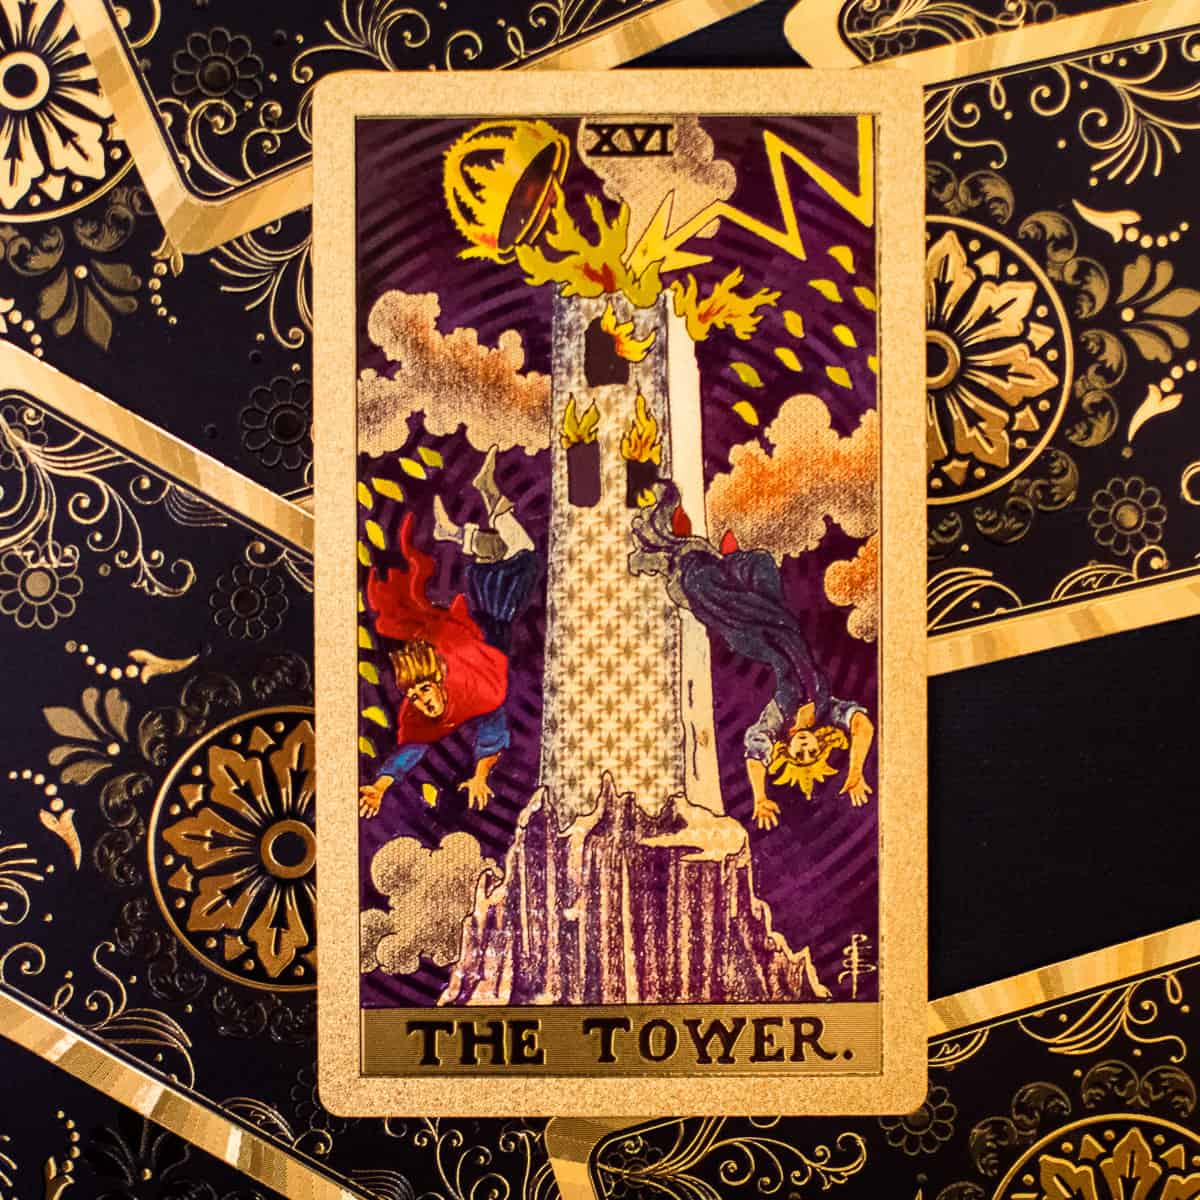 A tall tower being struck by lightening tumbling down in a storm depicted on a tarot card.